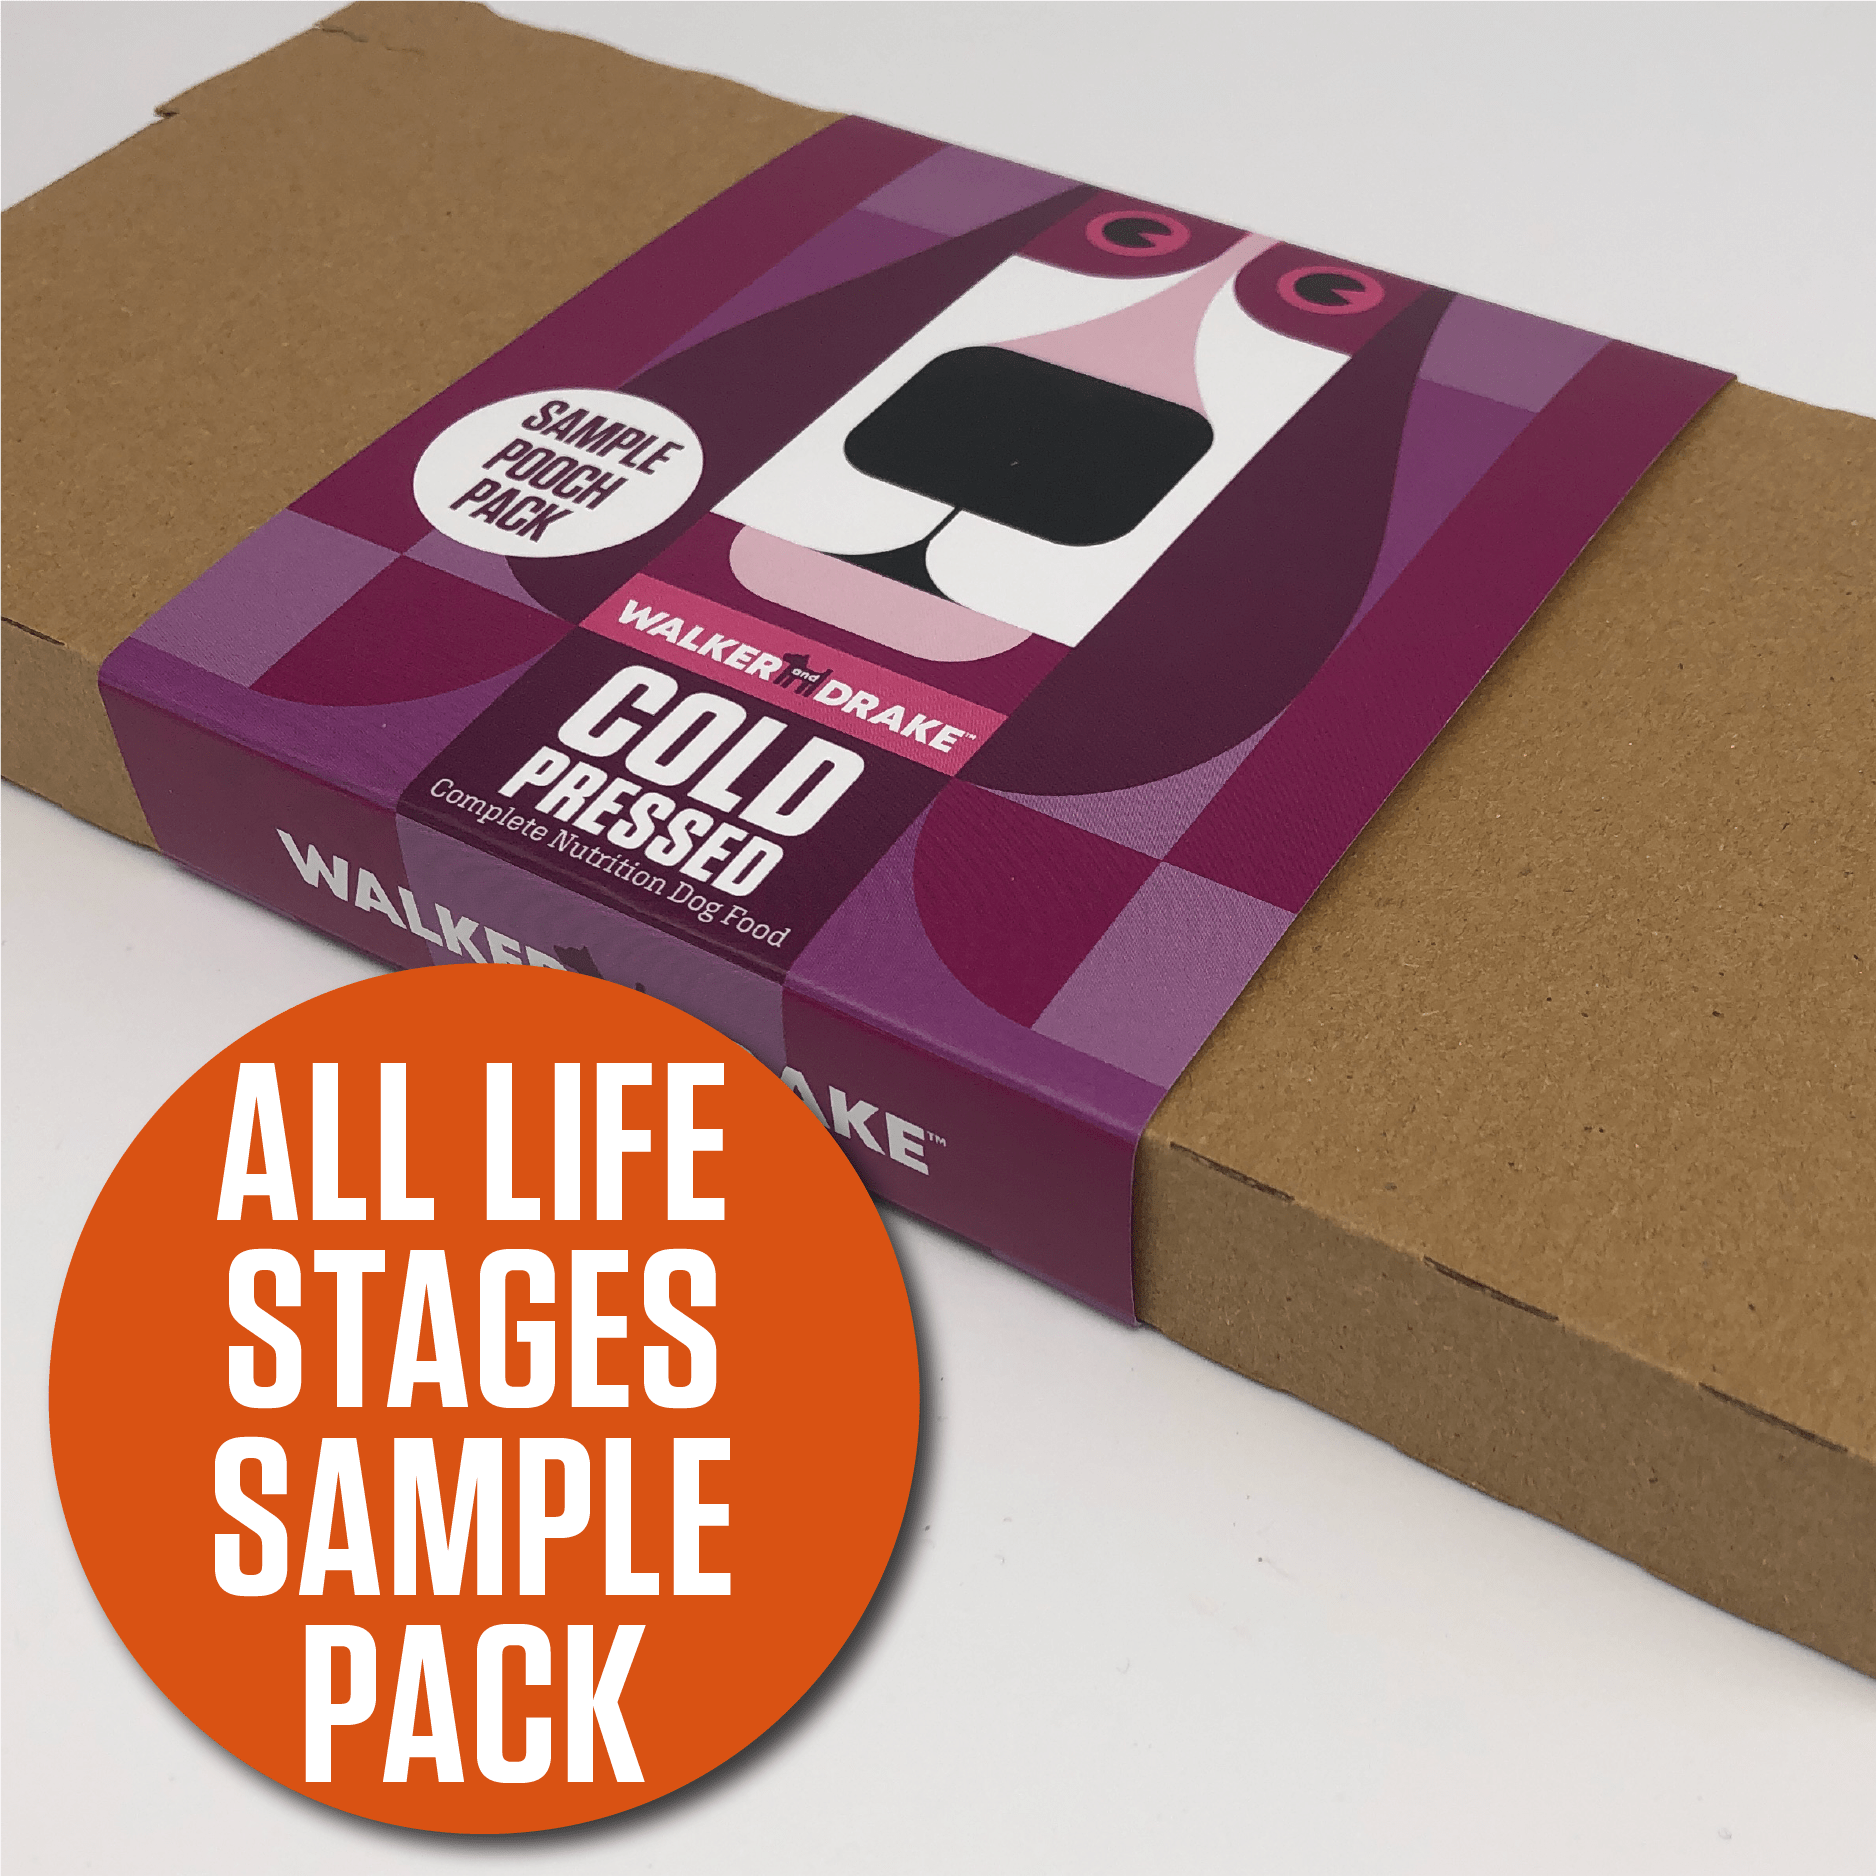 Walker and Drake SAMPLE PACK - FOR ALL LIFE STAGES - Duck, Ocean Fish & Chicken 5060750770115 SP160AD011